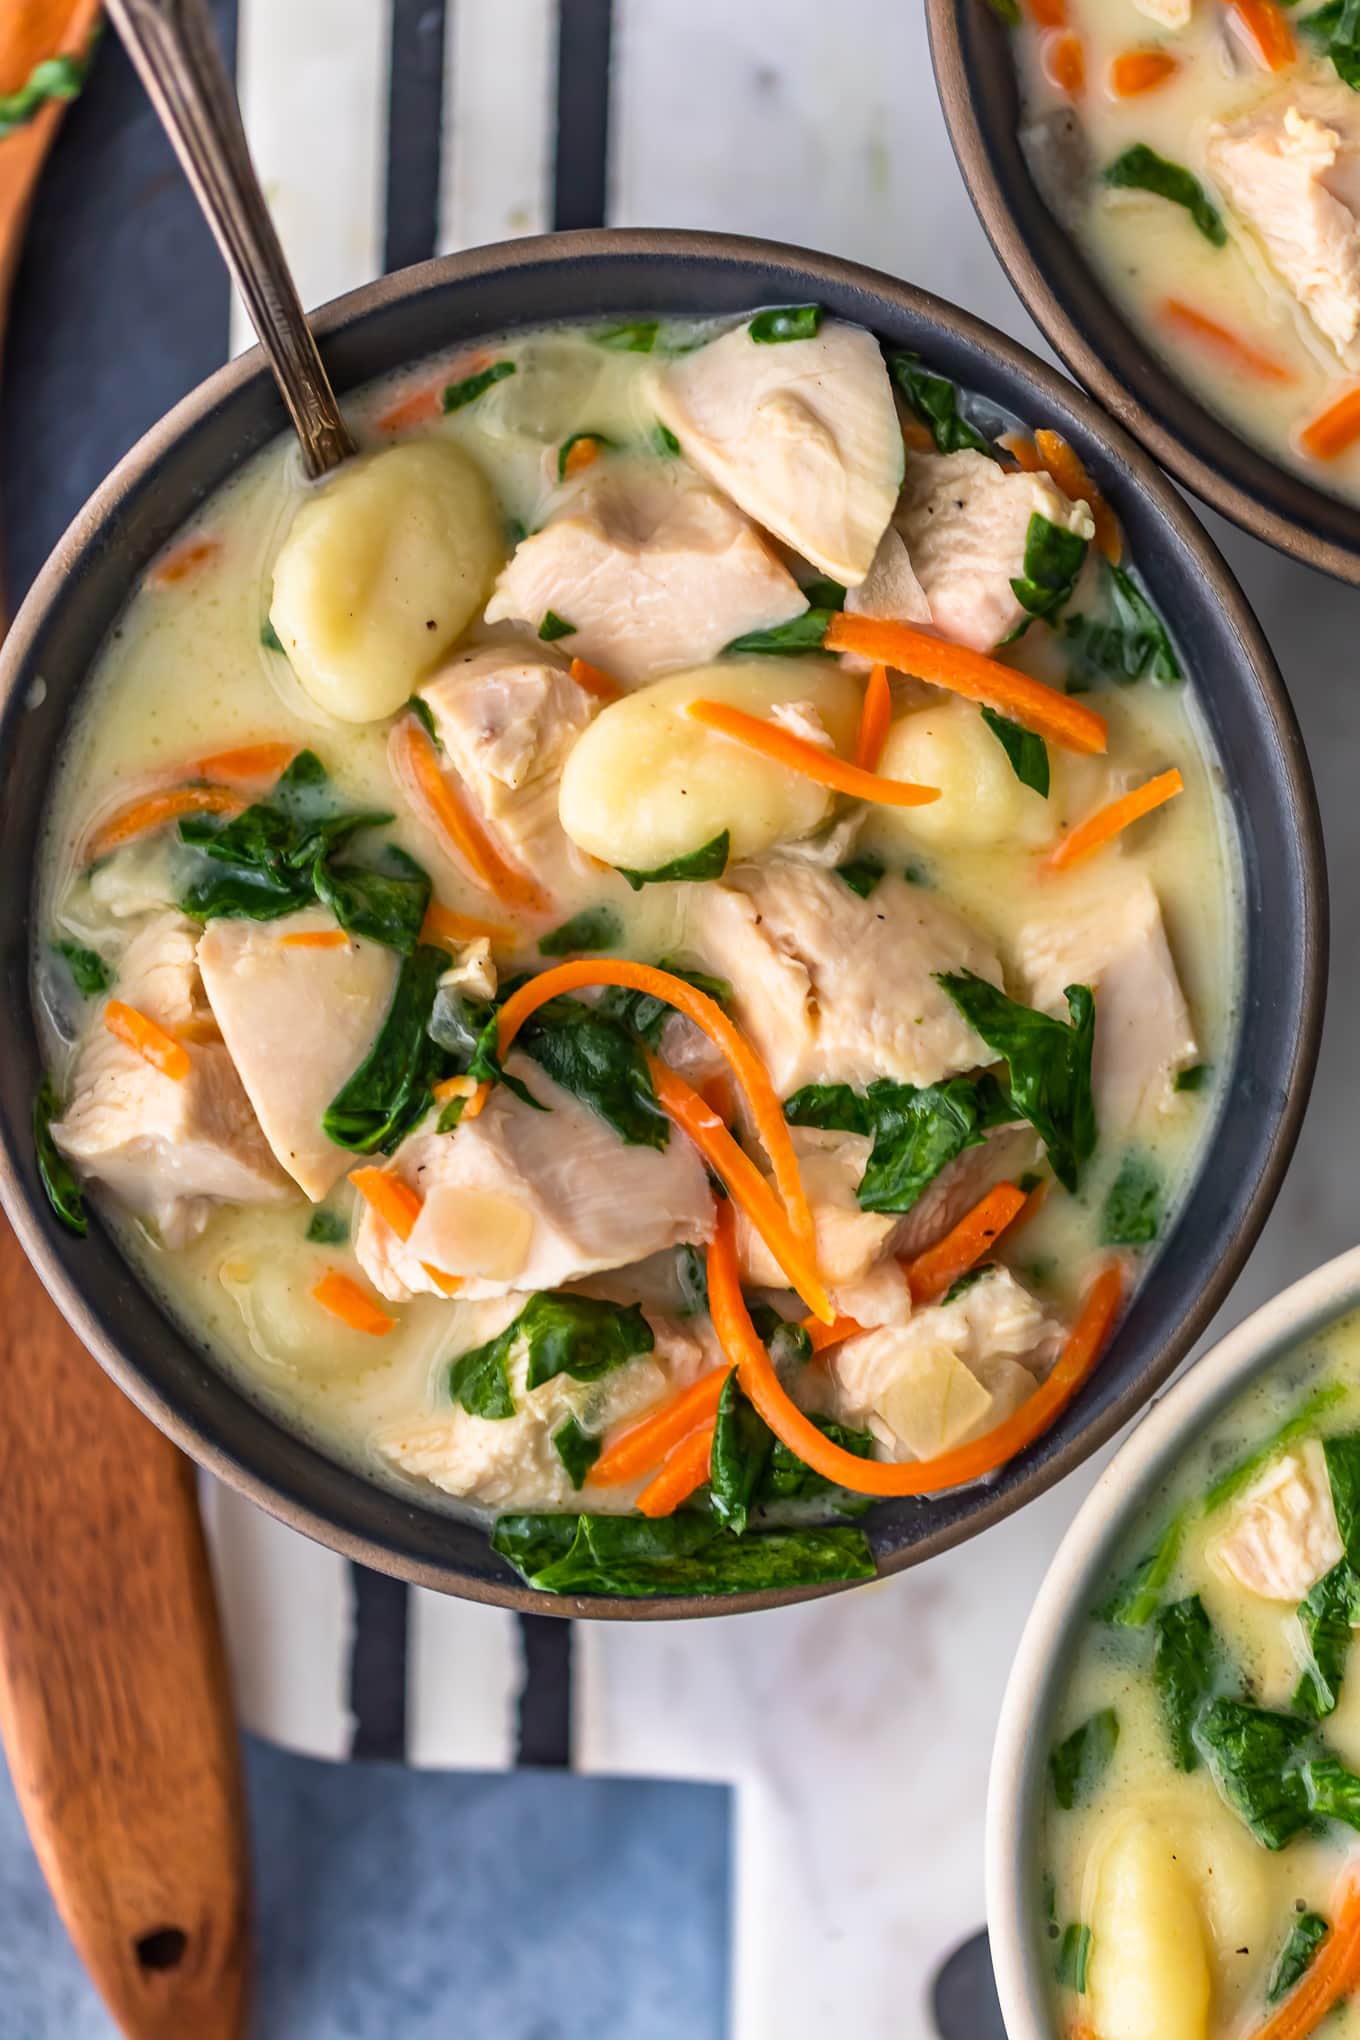 a bowl of creamy soup filled with carrots, gnocchi, chicken, and spinach